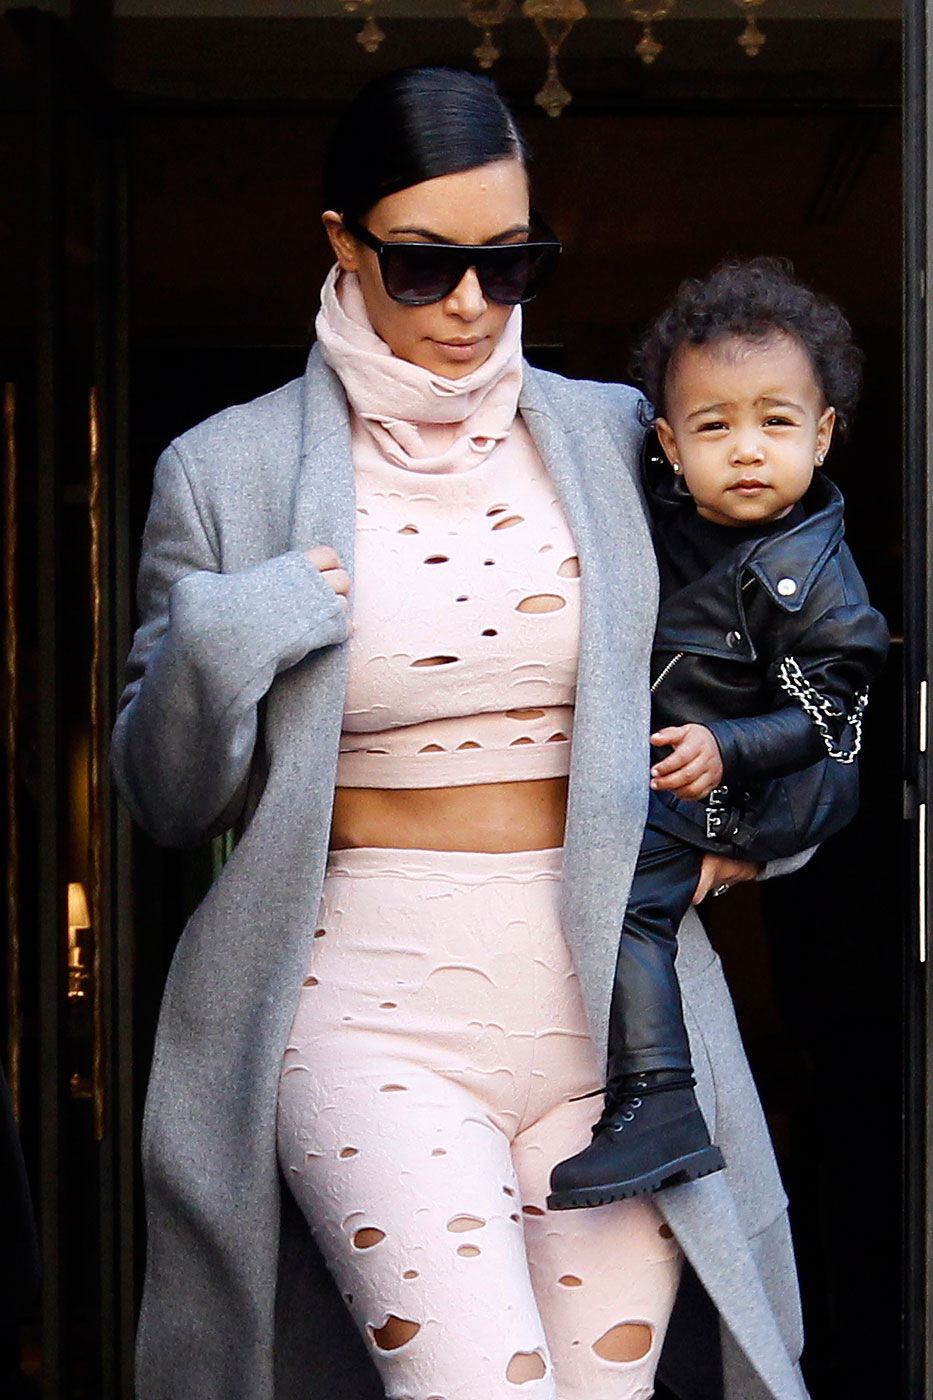 Kim Kardashian heads out for the airport with daughter North West in Paris